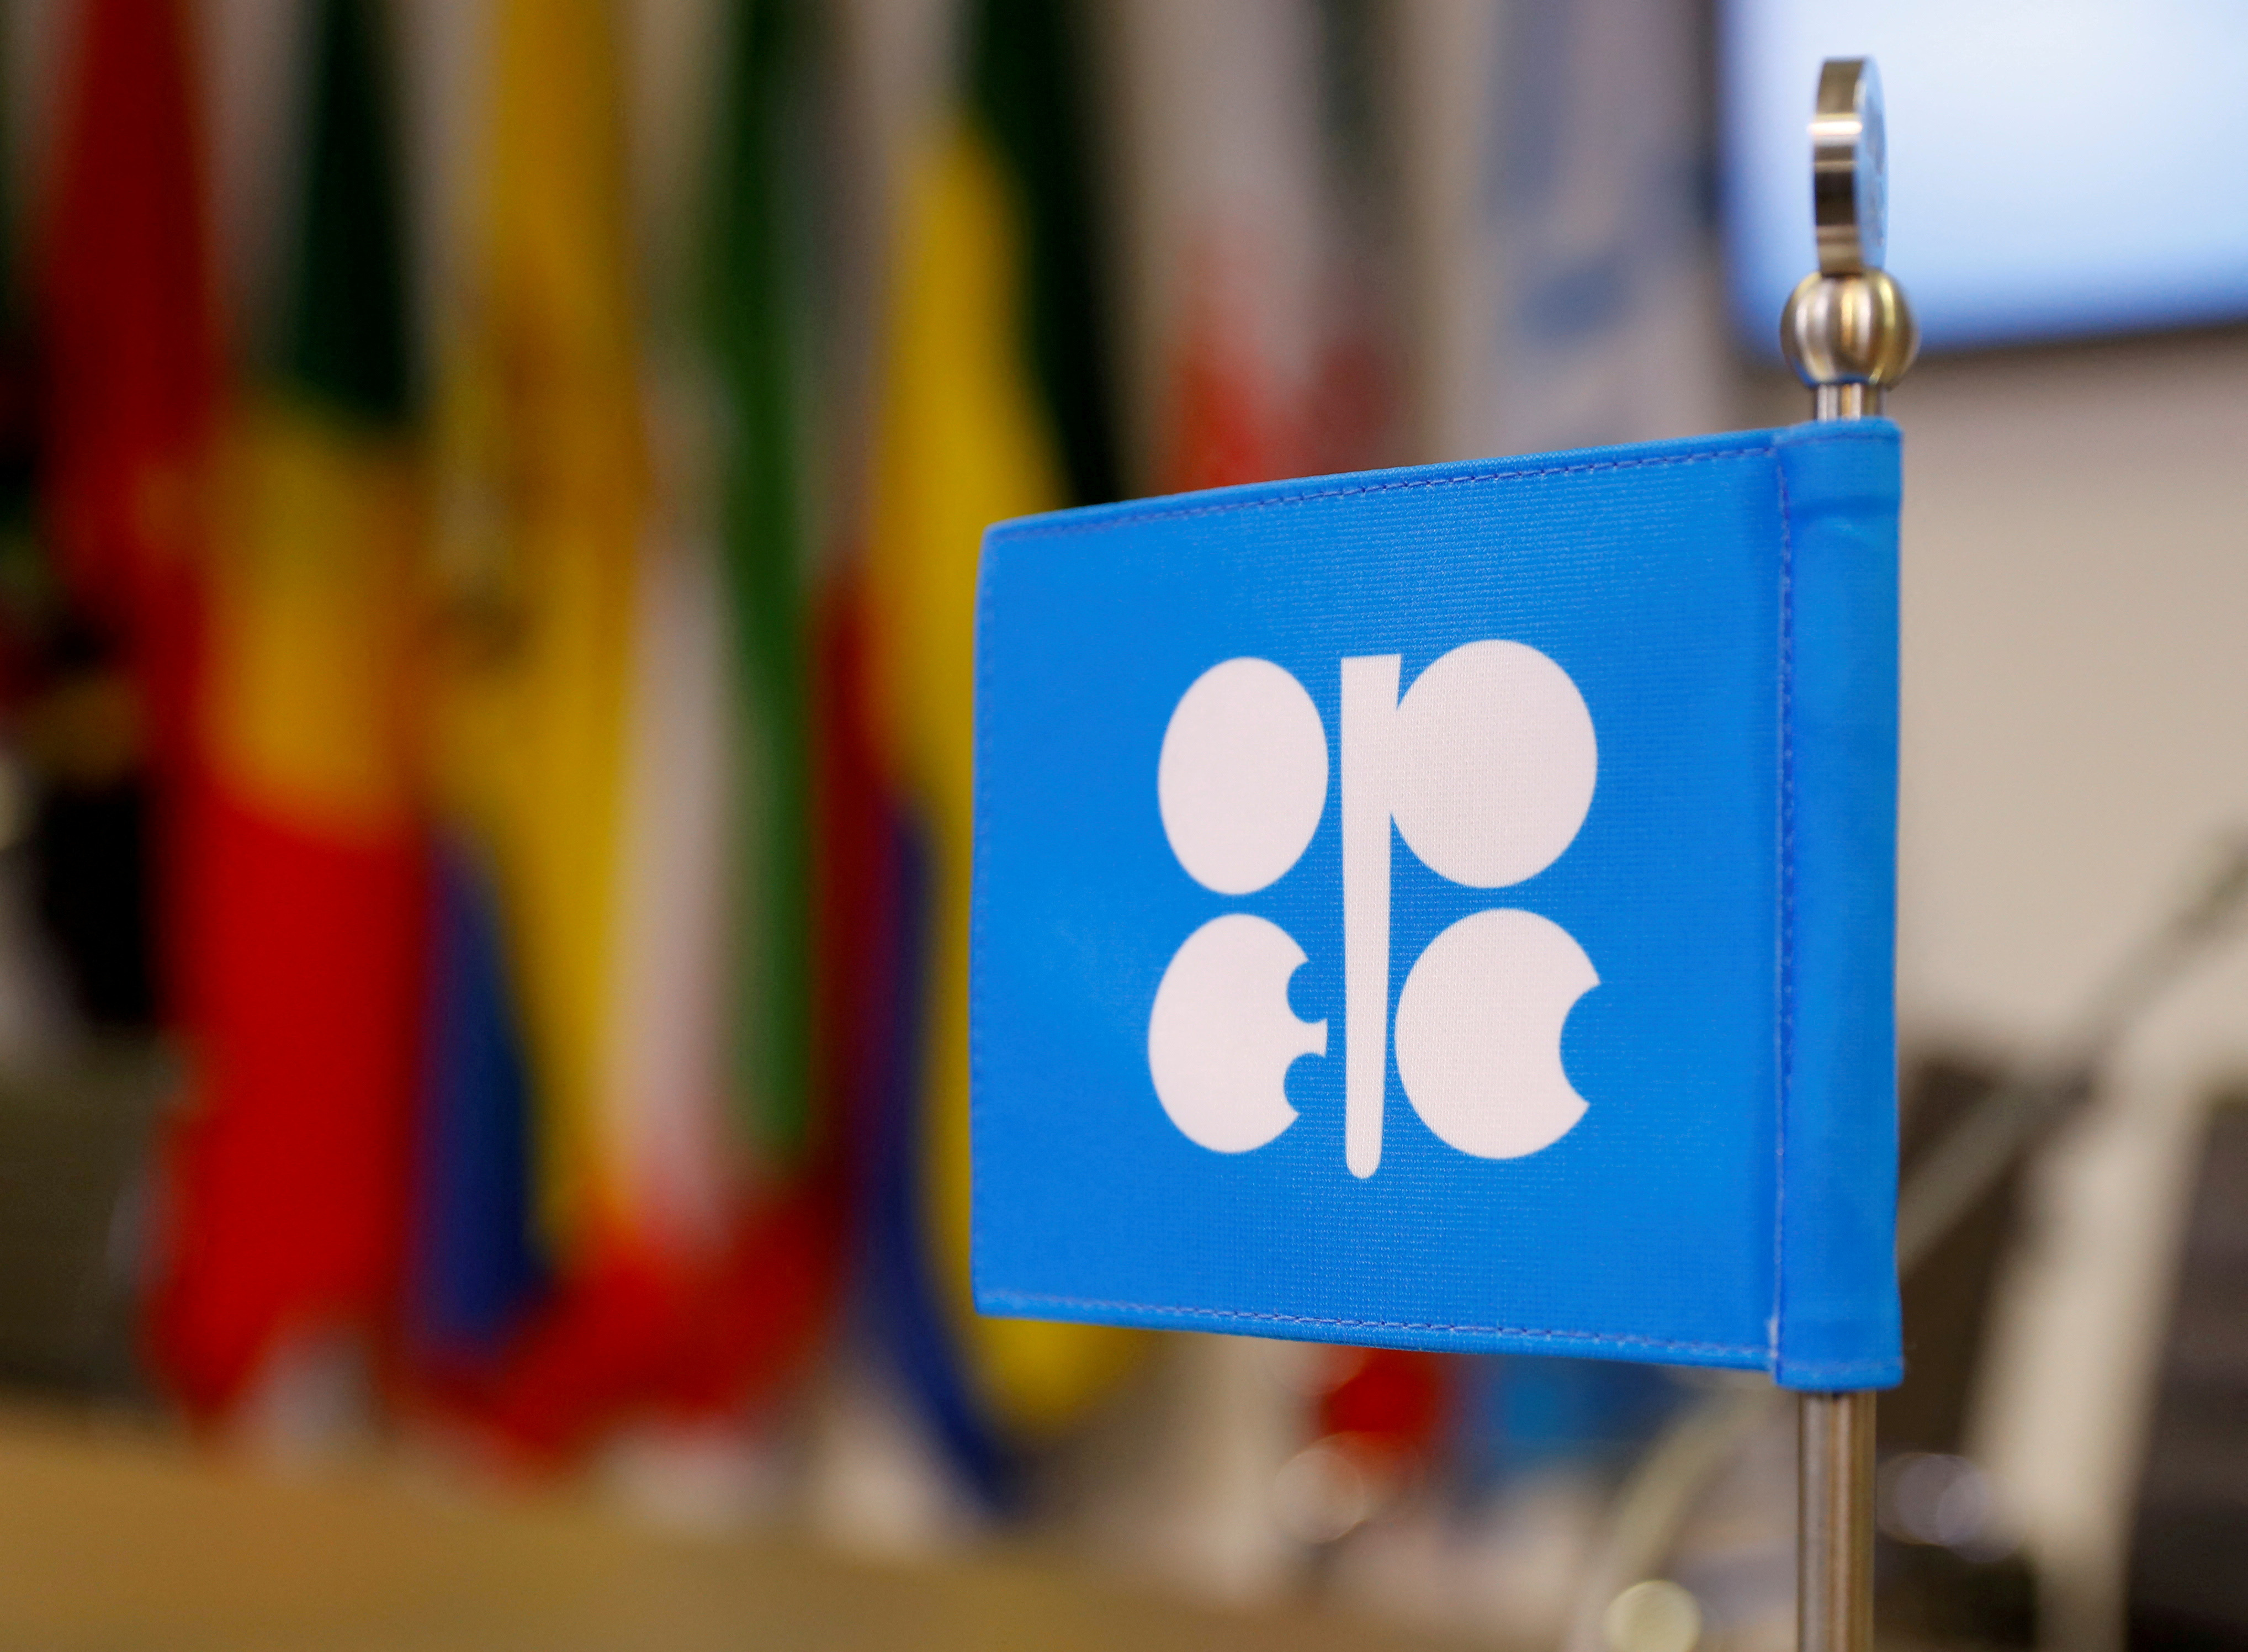 The logo of the Organization of the Petroleum Exporting Countries (OPEC) is seen inside its headquarters in Vienna